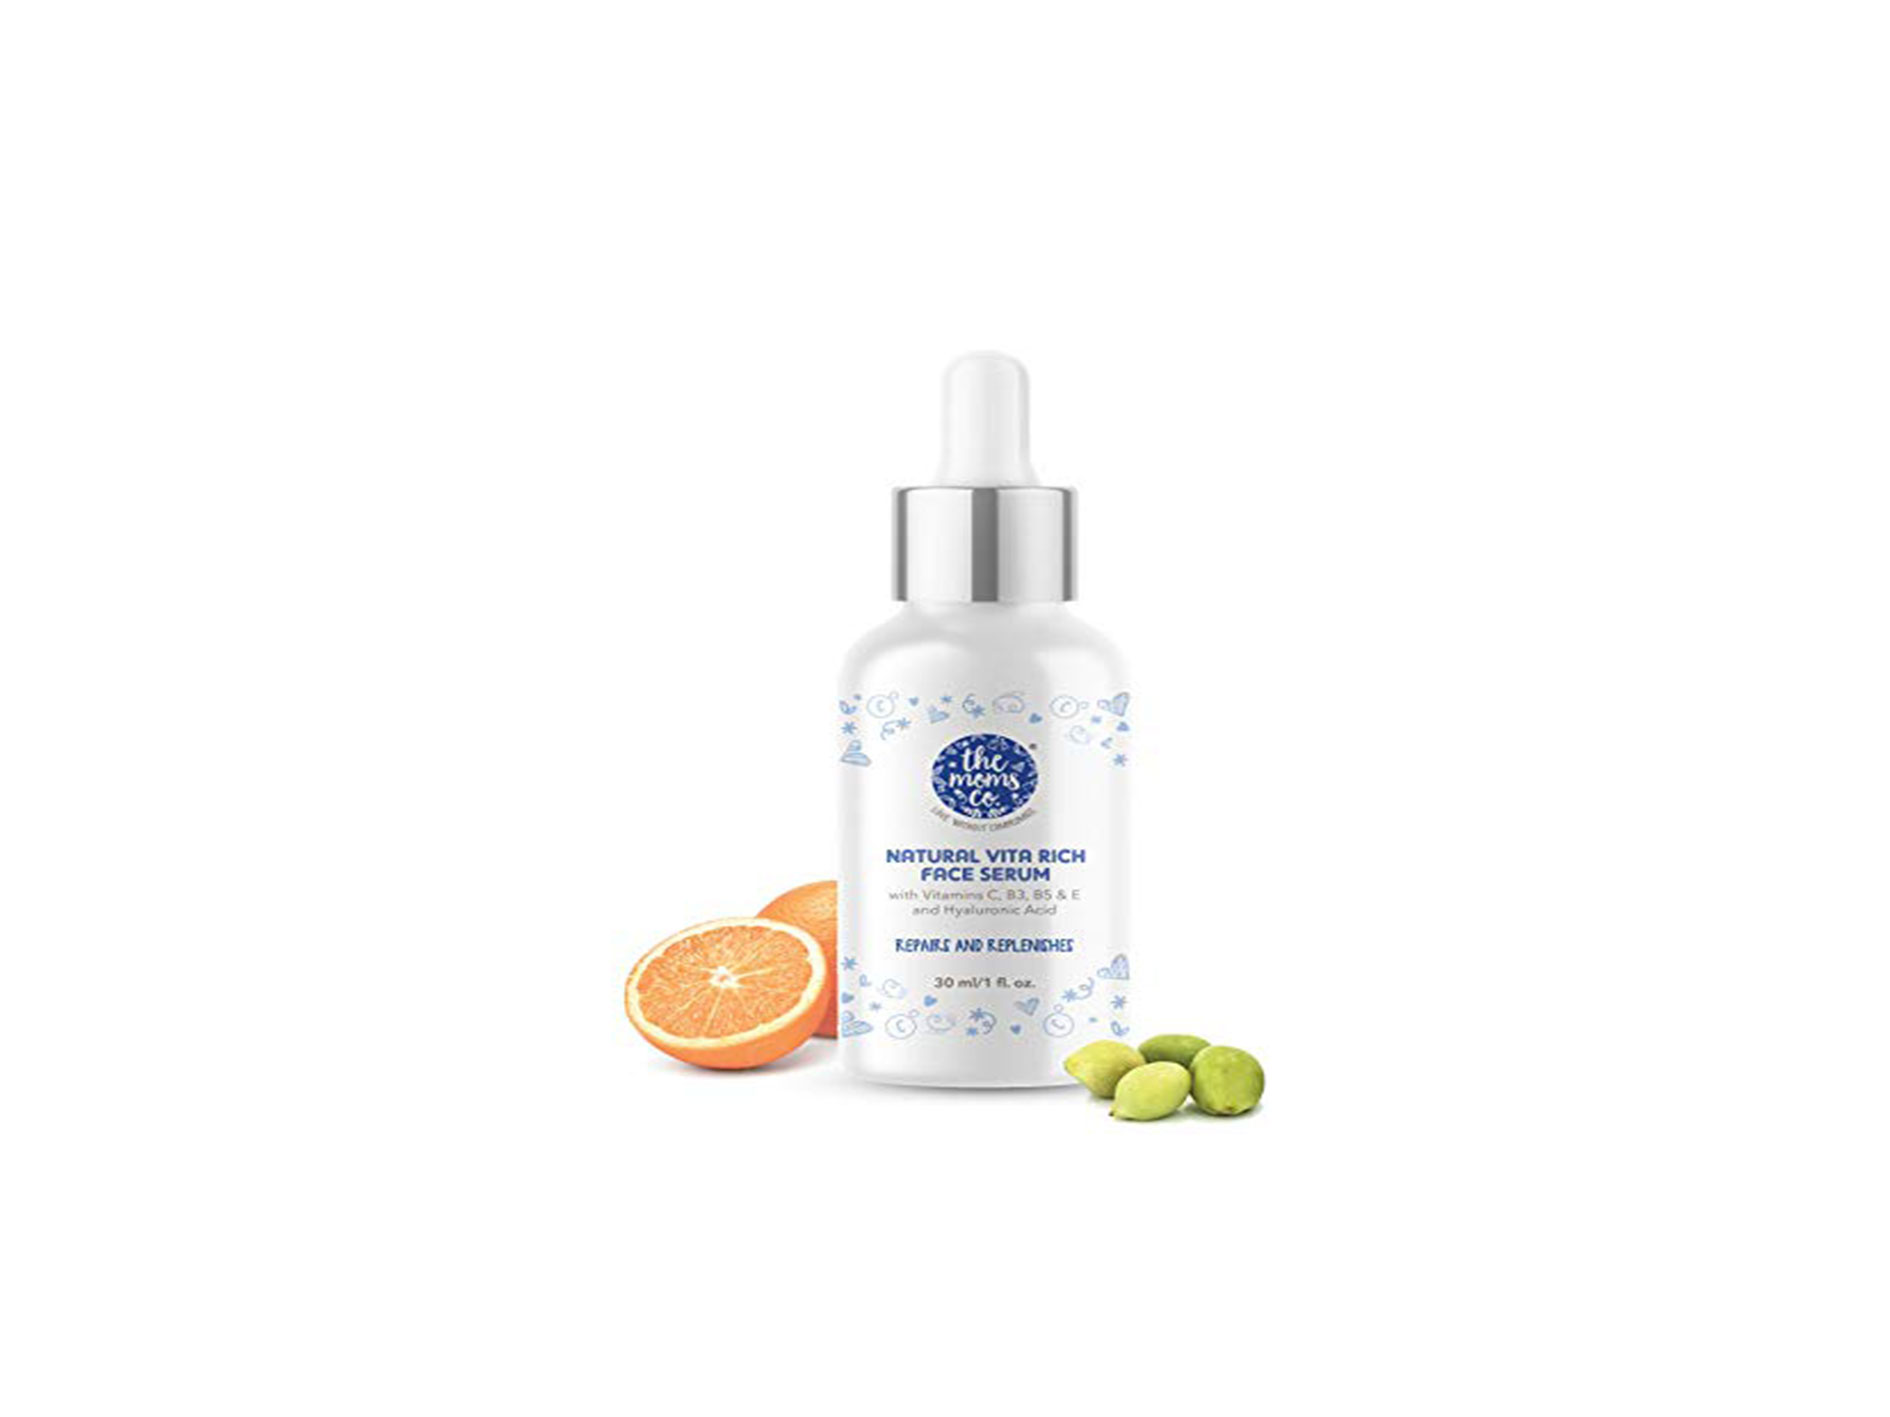 The Moms Co. Natural Vita Rich Face Serum for Deep Hydration,Pigmentation, Fine Lines & Wrinkles with Hyaluronic Acid,Vitamin B3, B5, E (30ml)